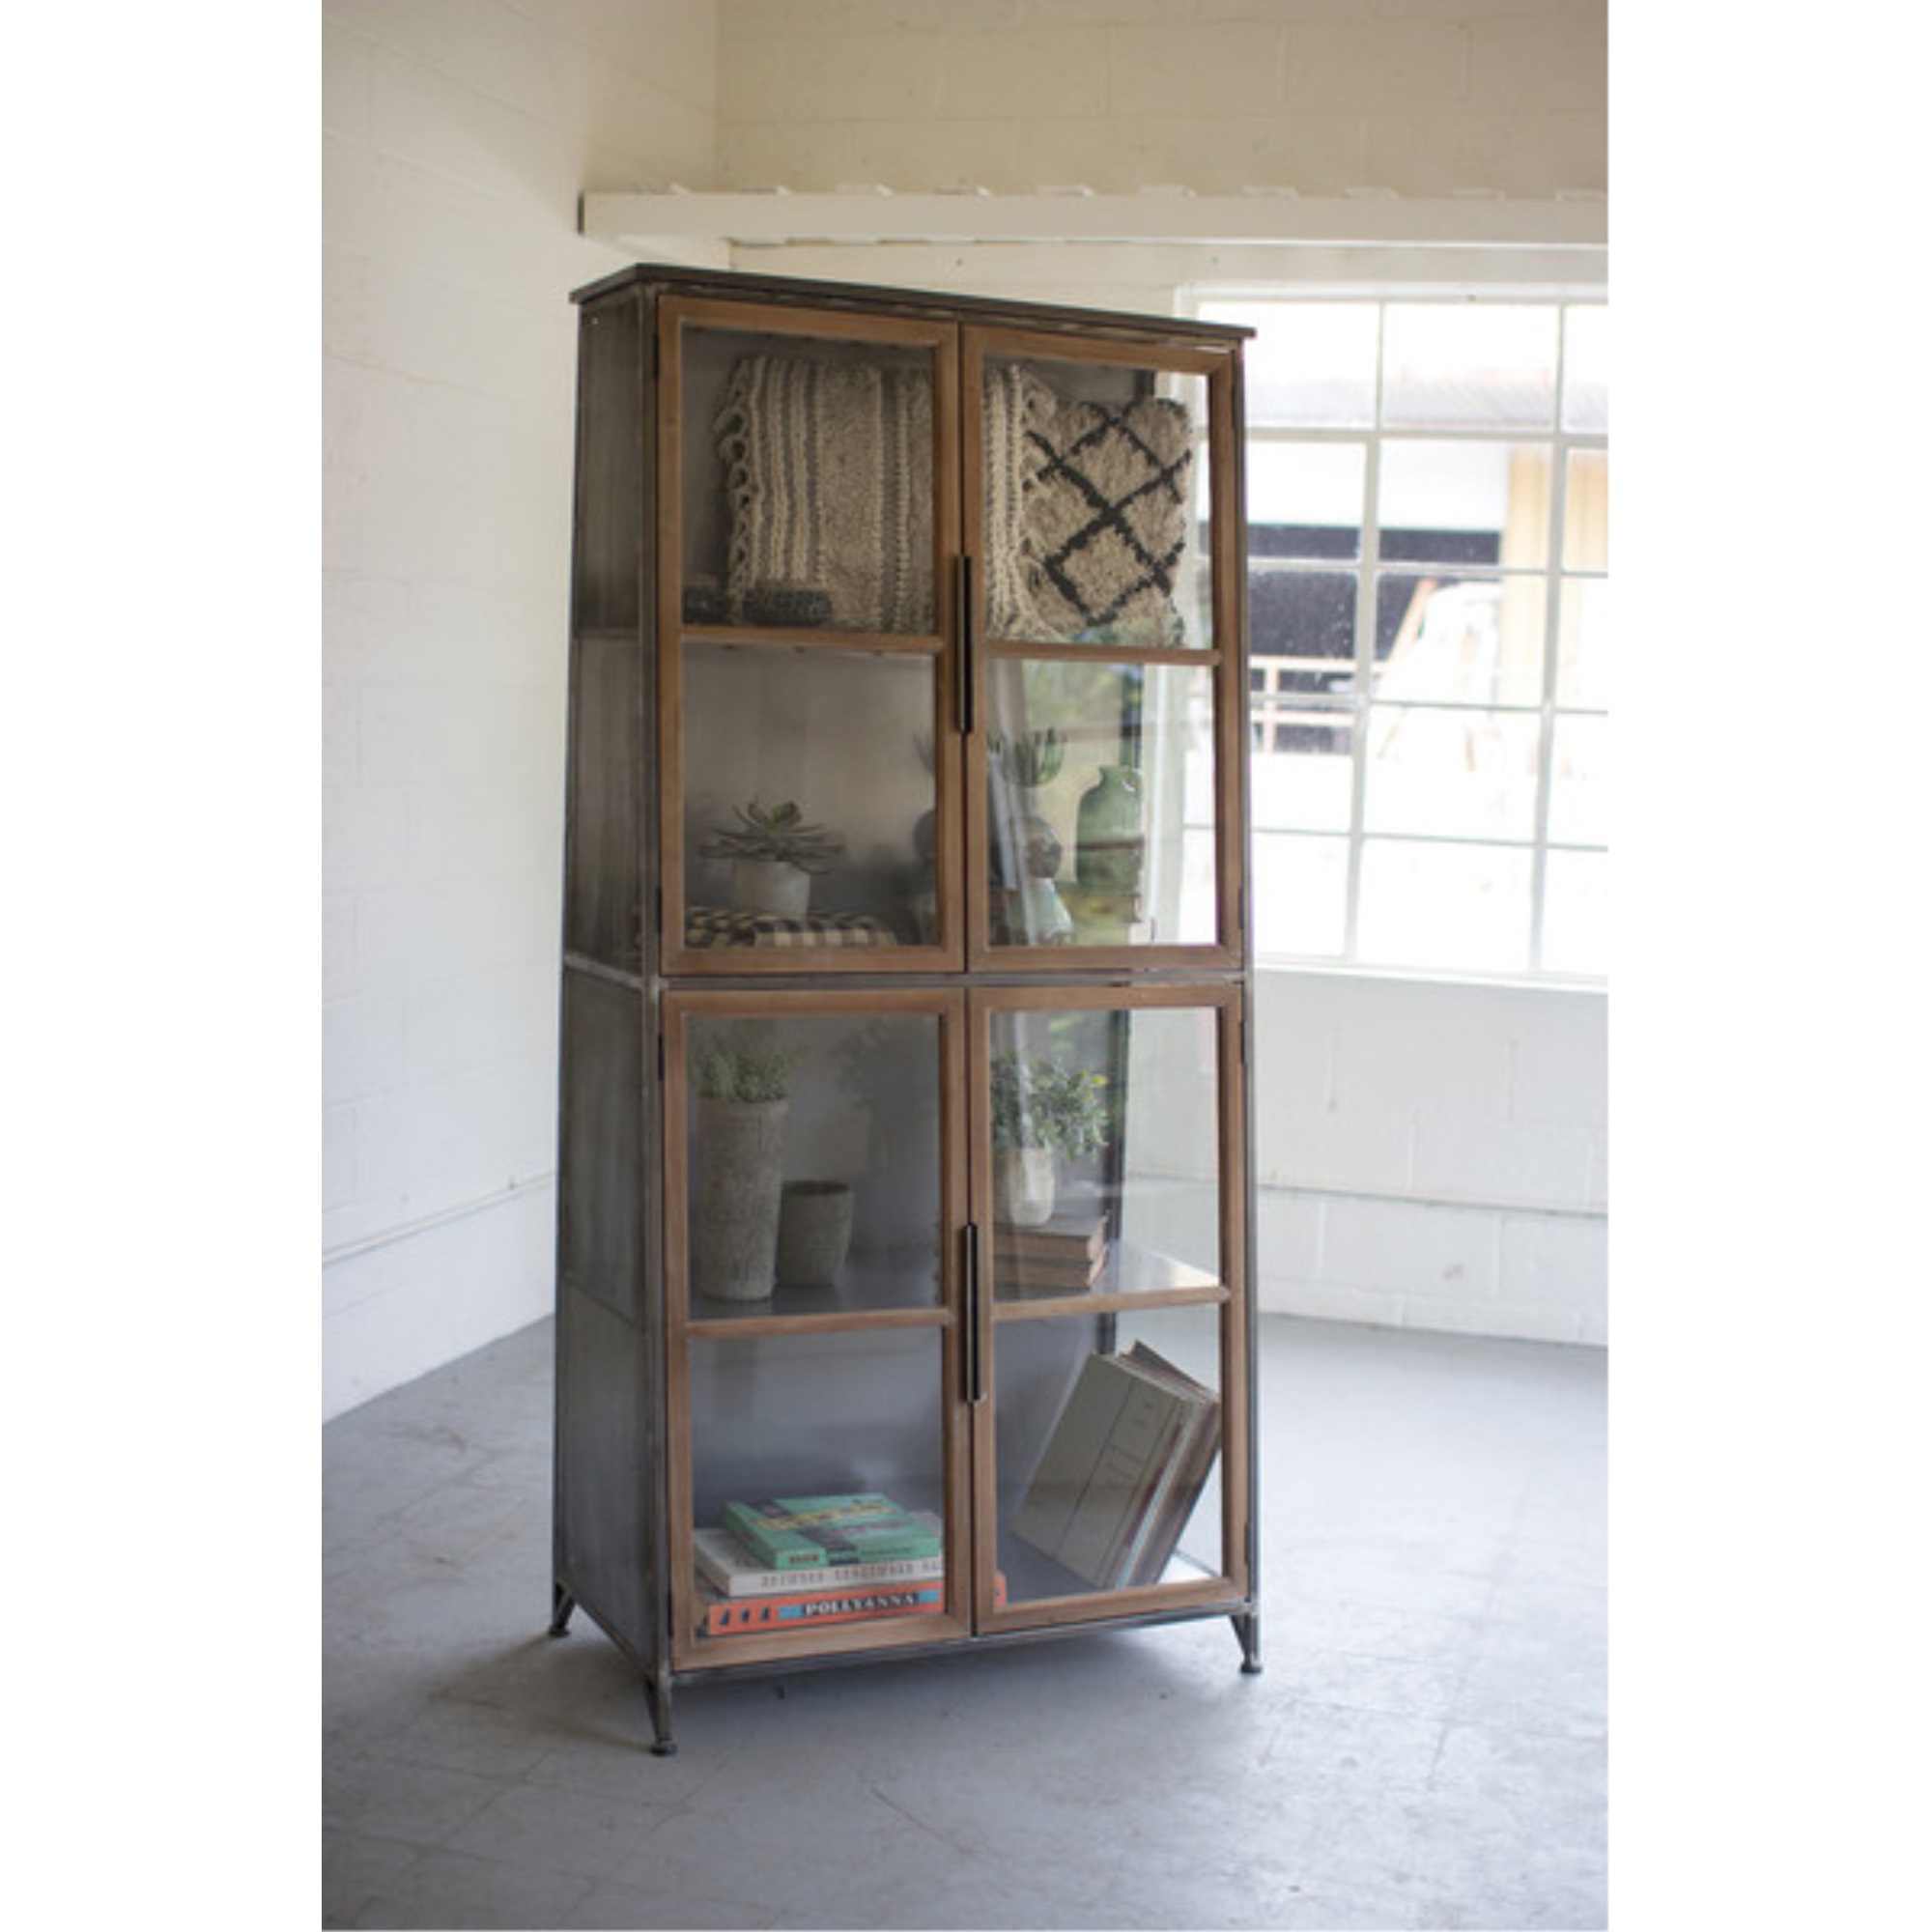 Kalalou CLL2219 38 x 20.5 x 79 in. Metal & Wood Slanted Display Cabinet with Glass Doors